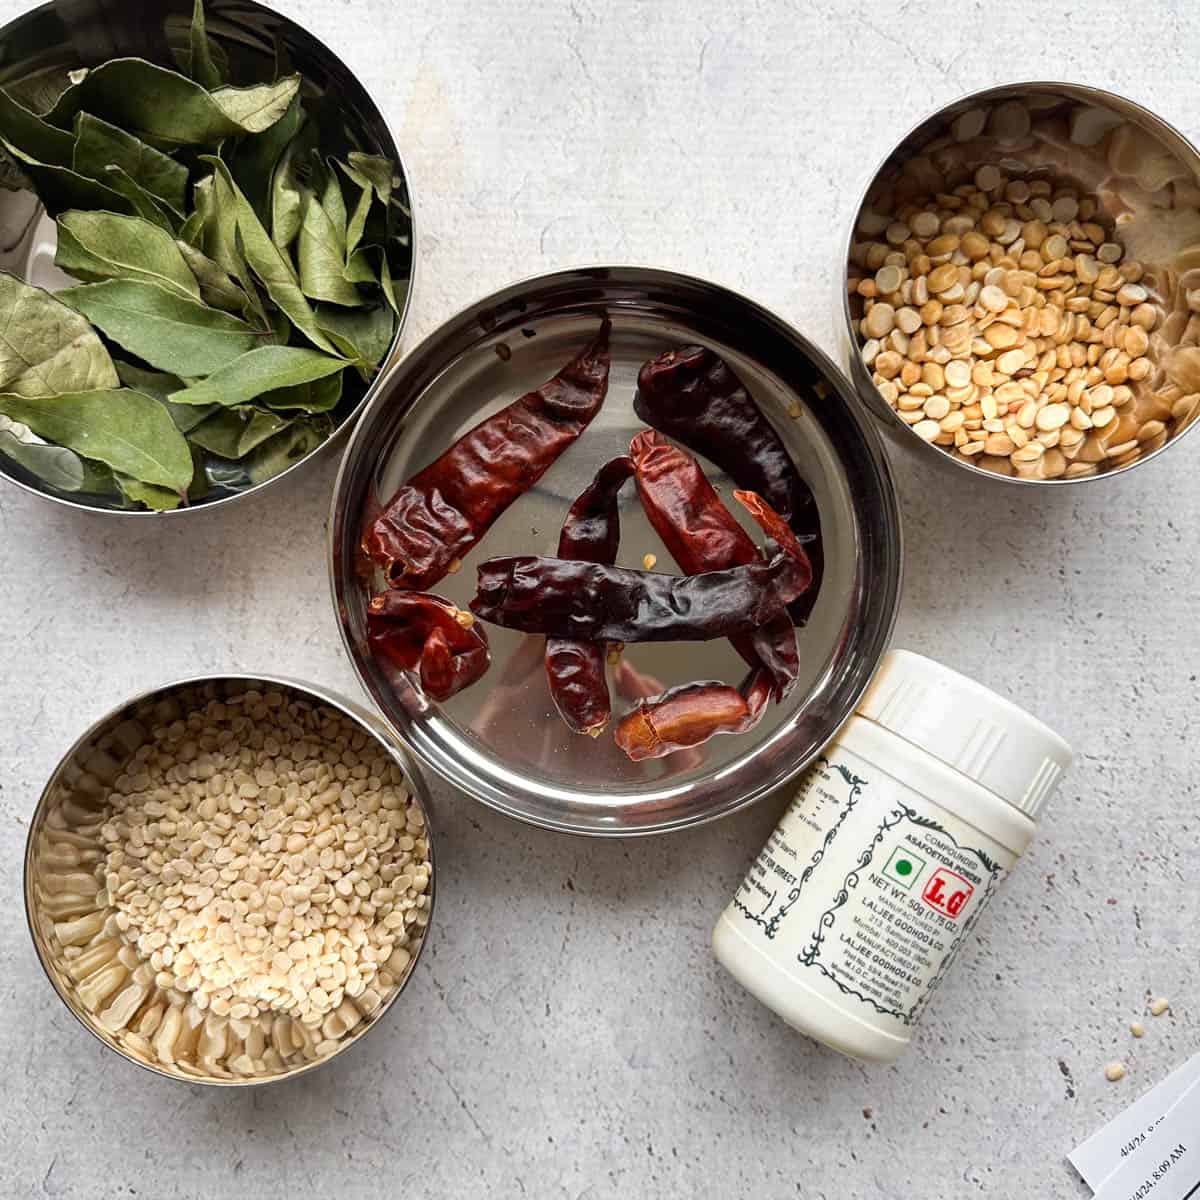 5 ingredients needed to make milagai podi or Indian gunpowder. Pictured are bowls of curry leaves, chana dal, split and hulled urad dal, dried red Indian chilis, and asafoetida.